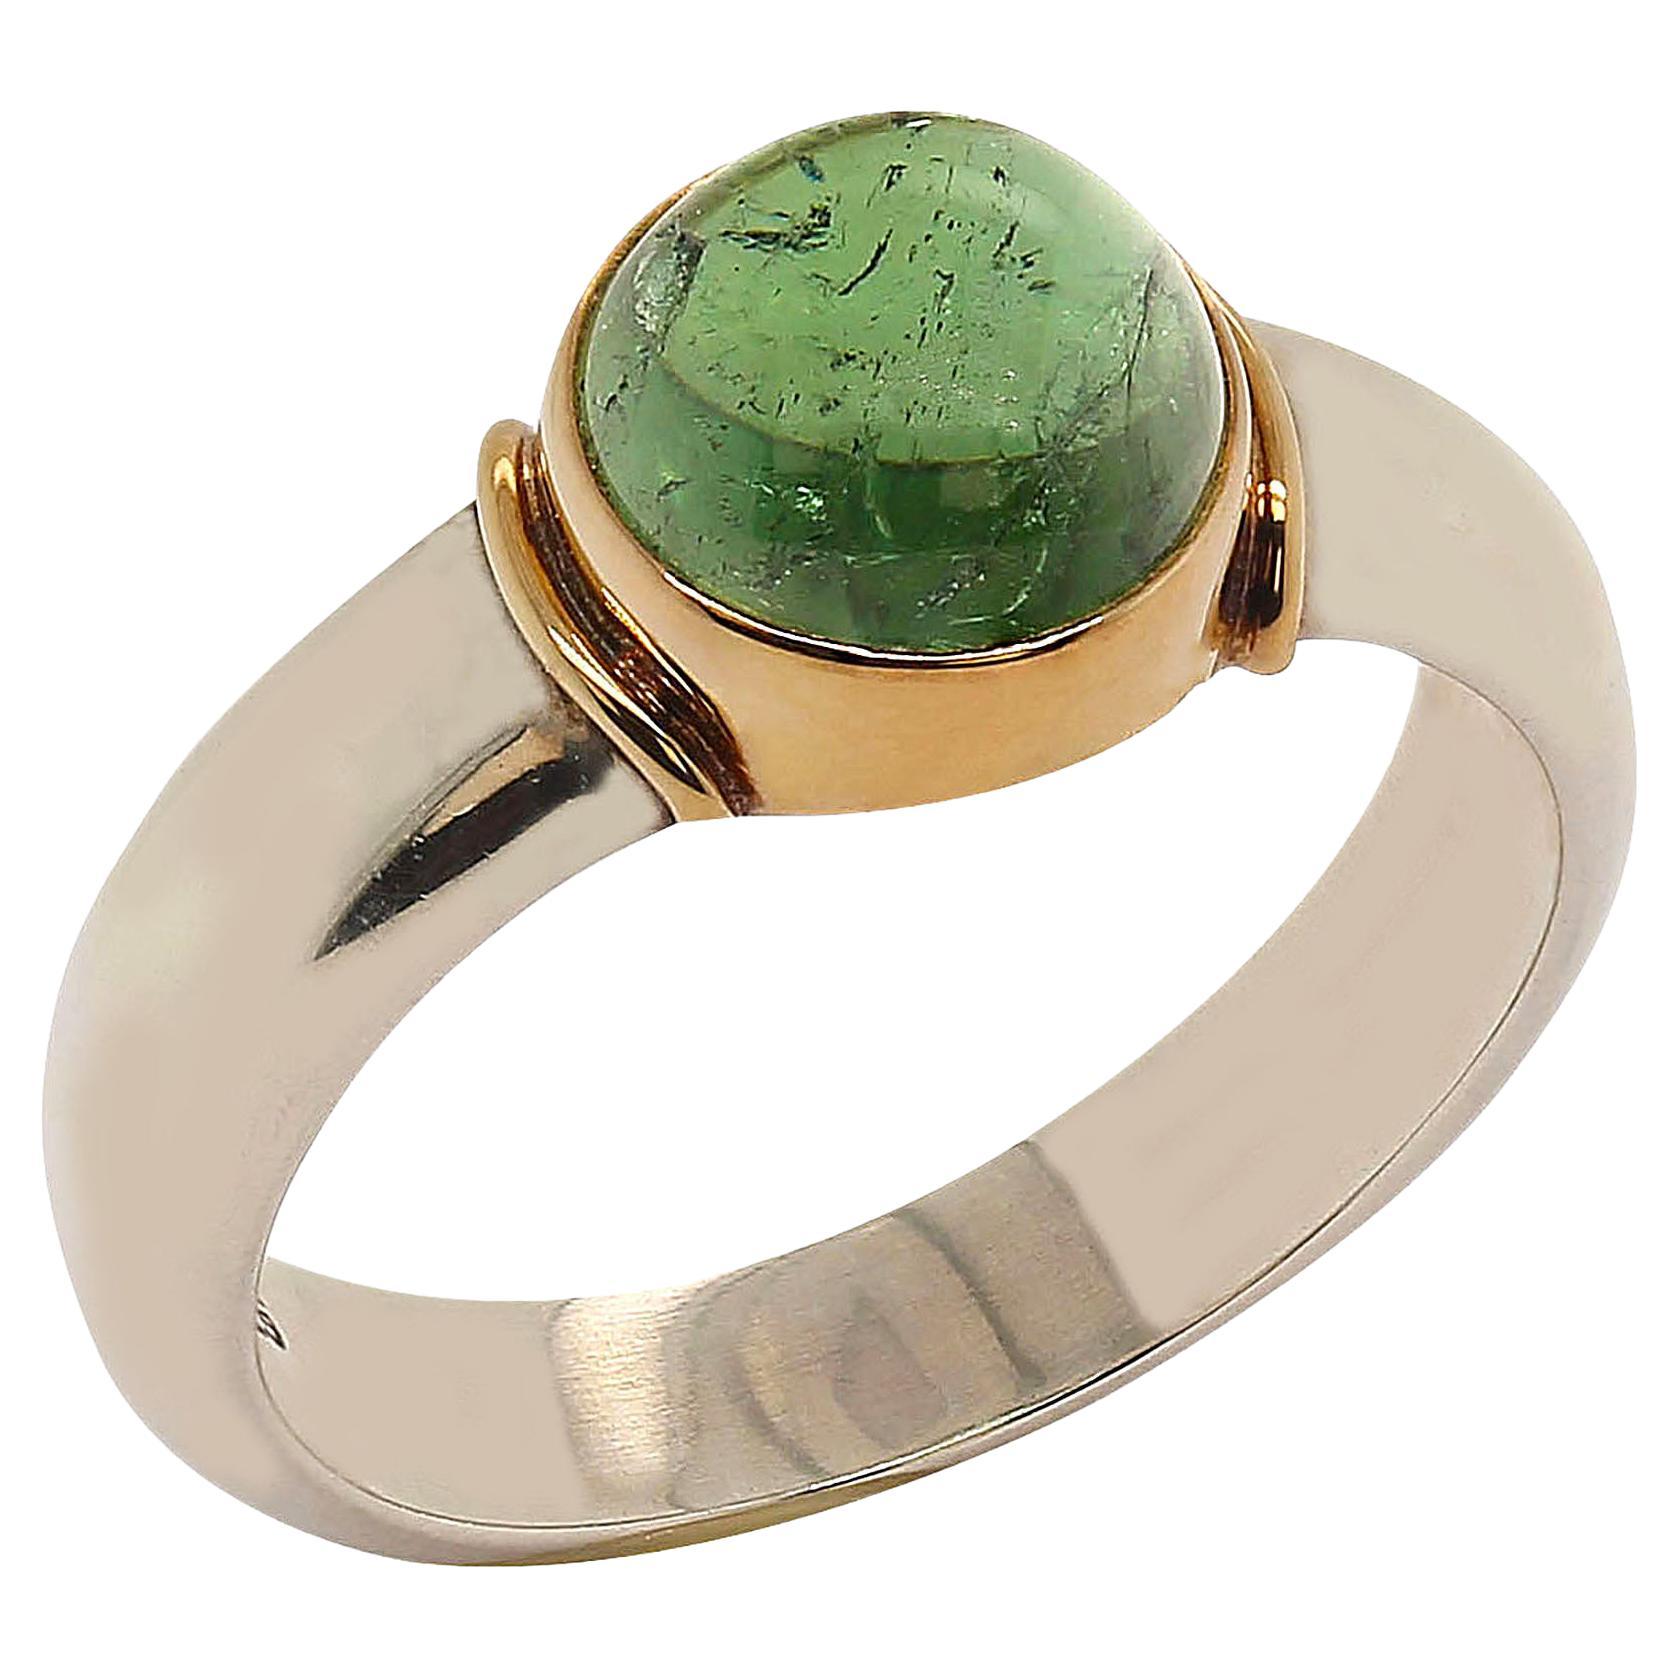 AJD Blue-Green Cabochon Tourmaline and Sterling Silver Ring with 18K Gold 